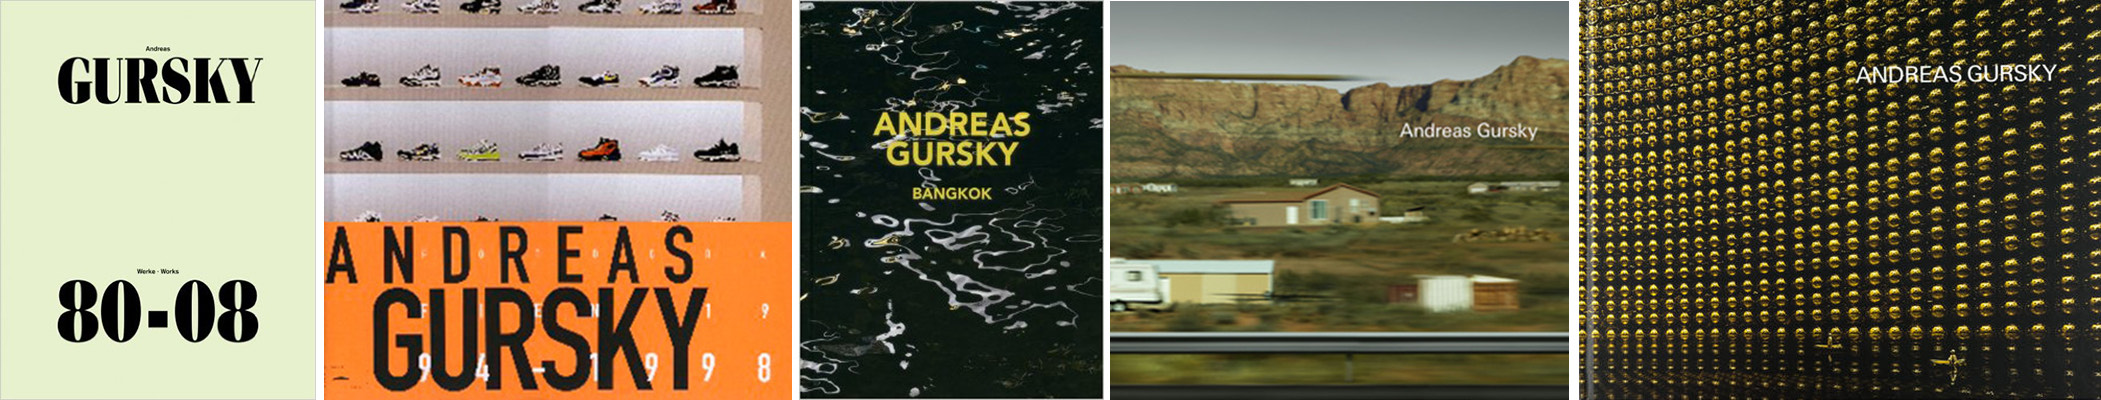 Andreas Gursky books 2 iFocus